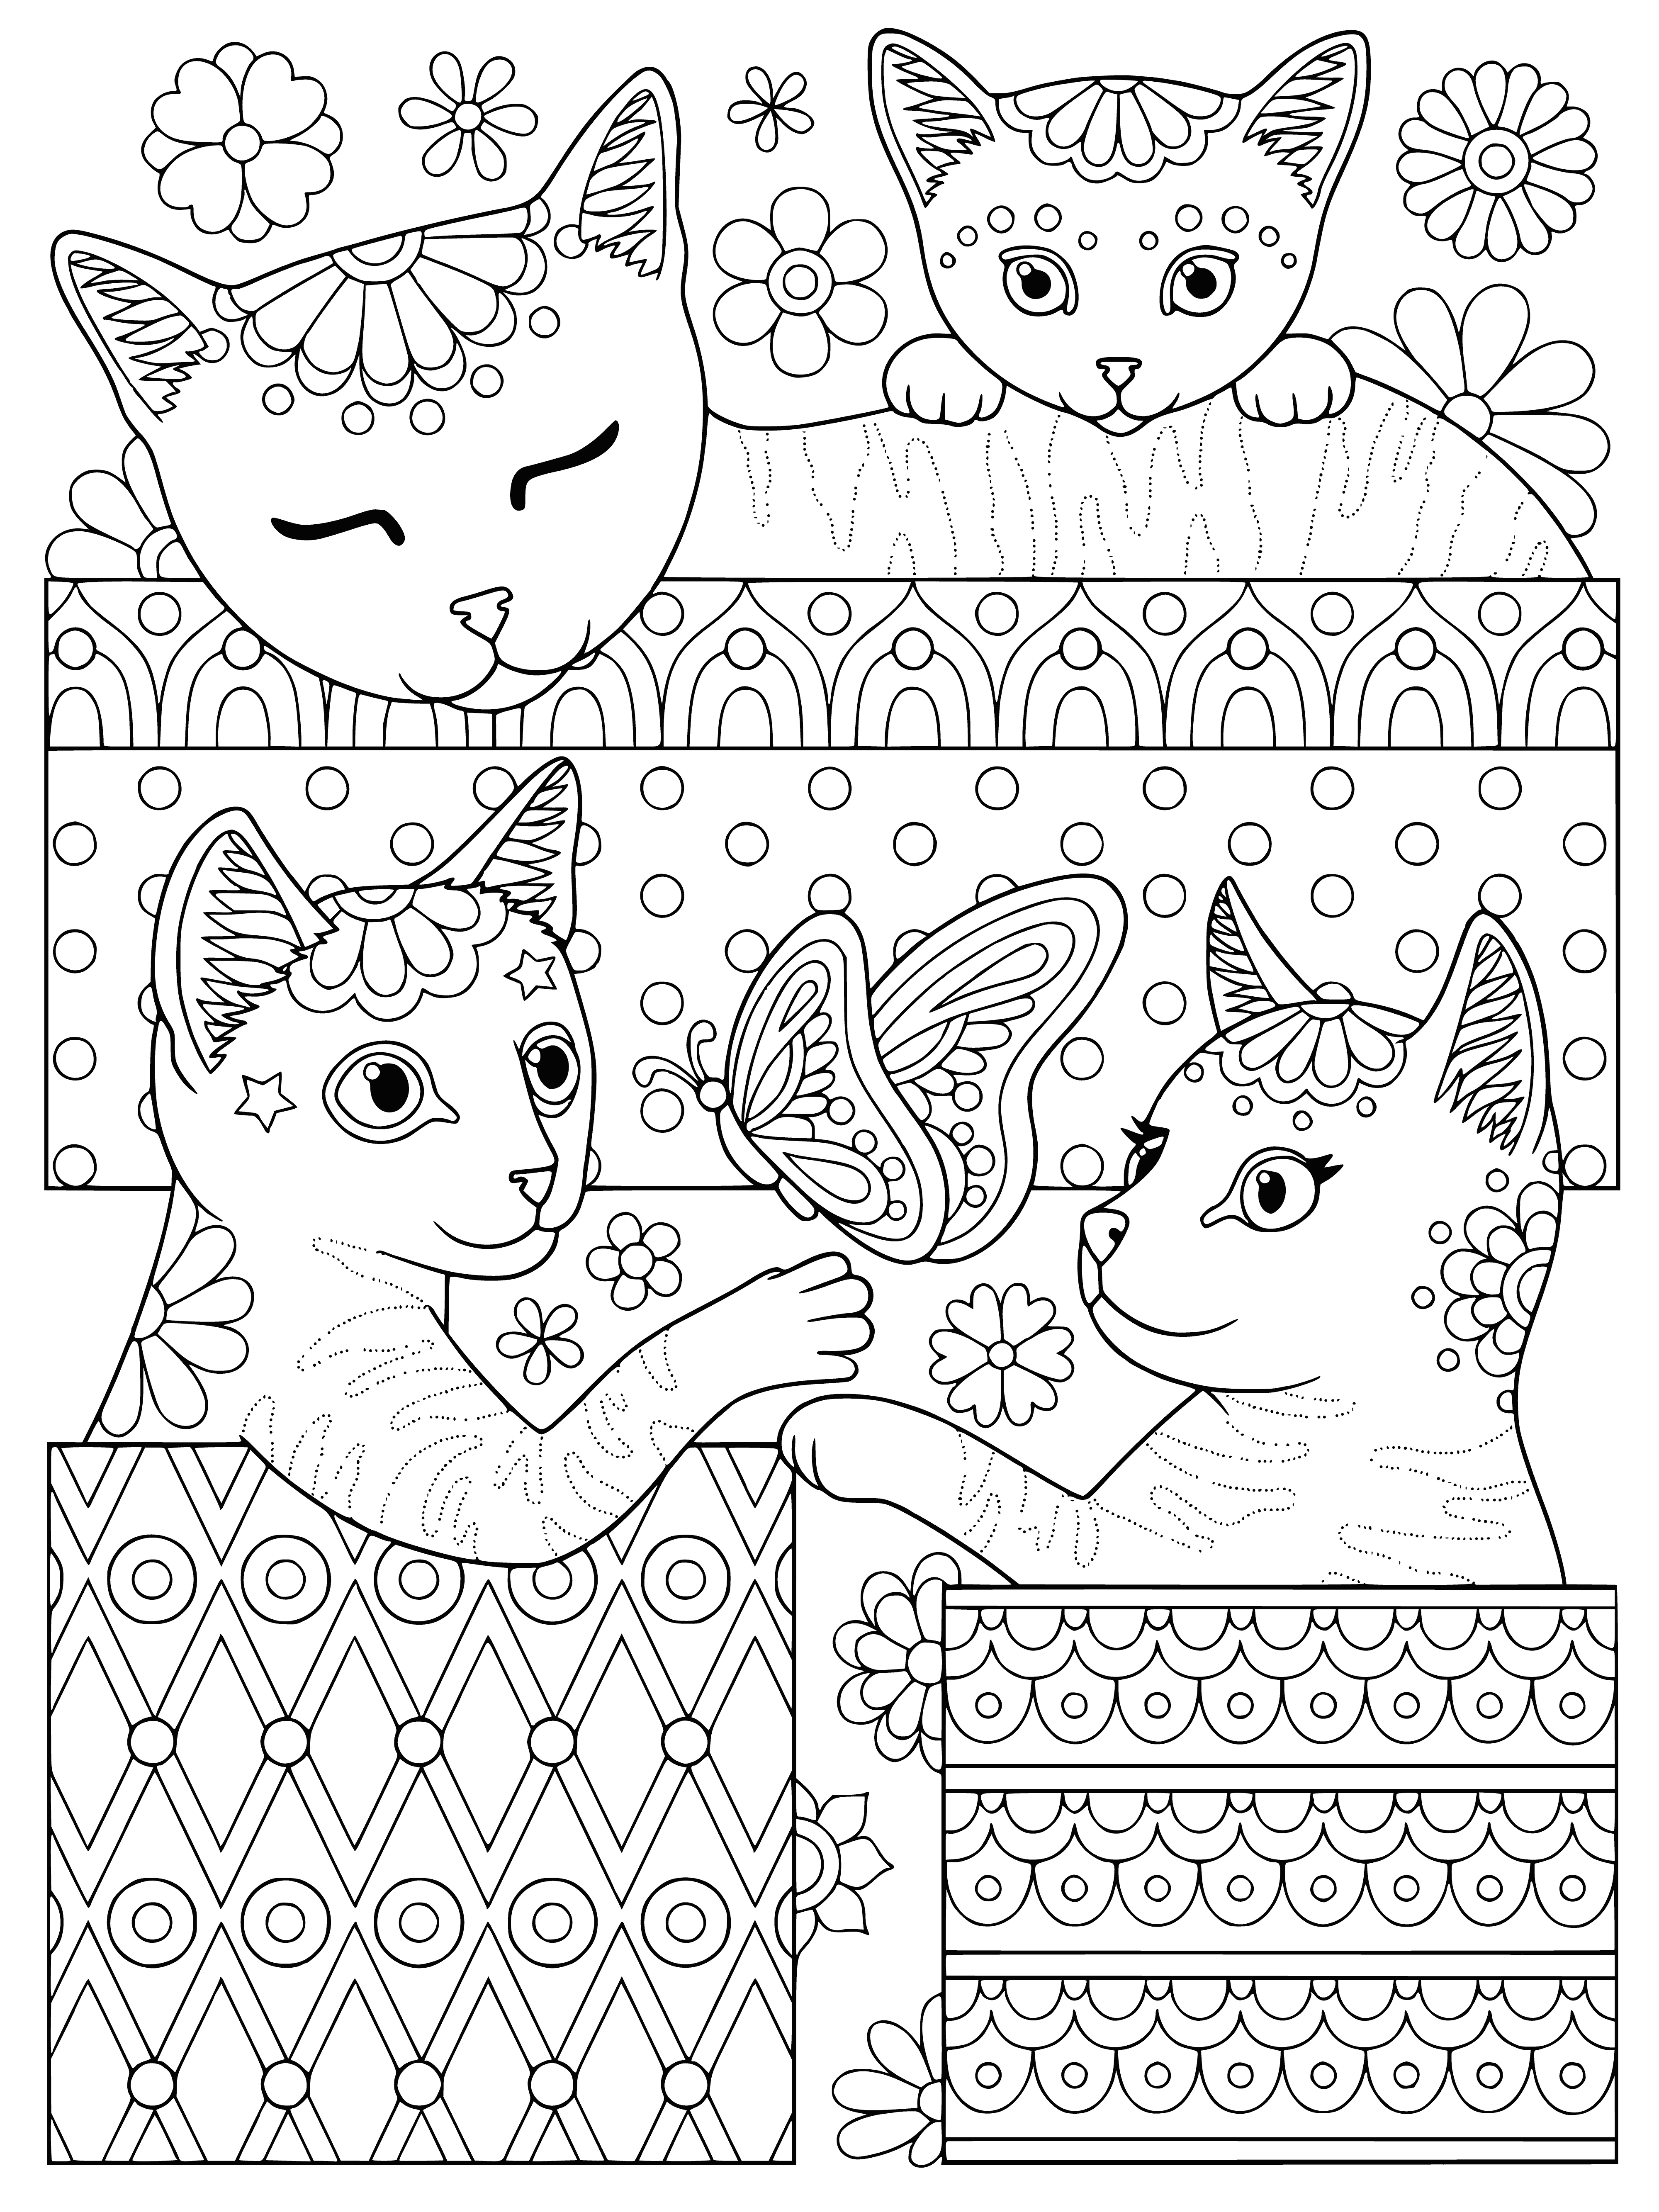 Cats in boxes coloring page